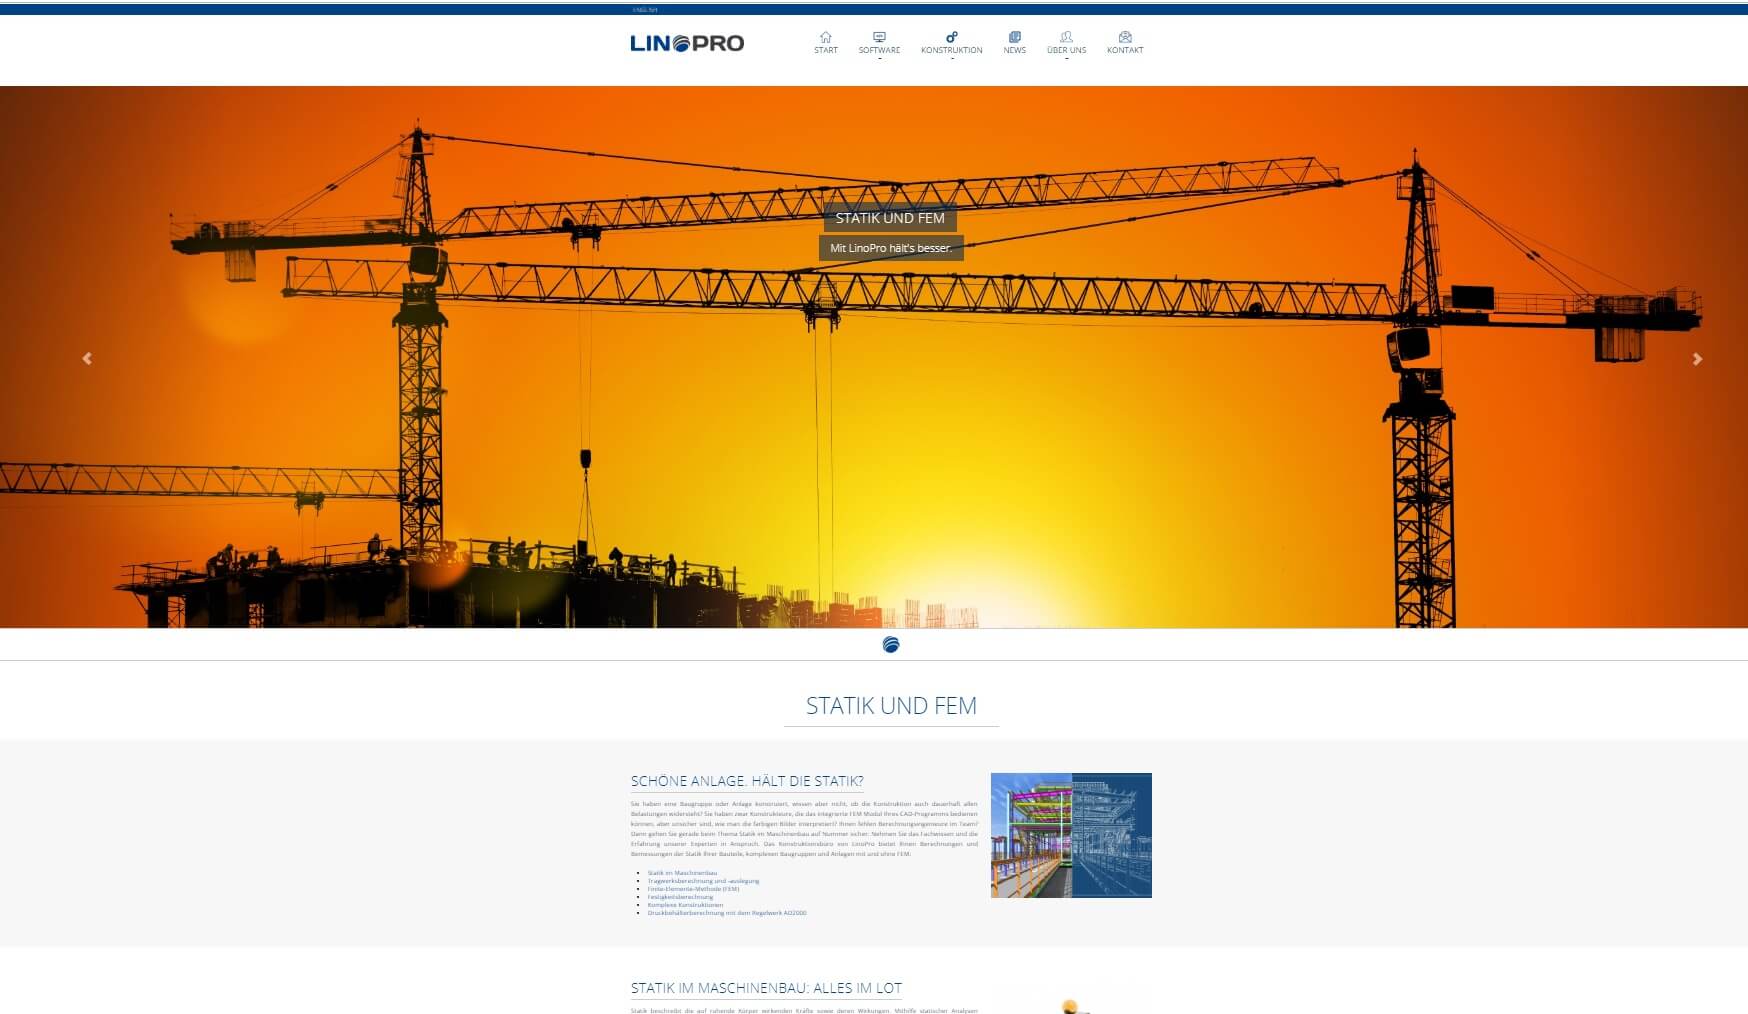 LinoPro relaunches website